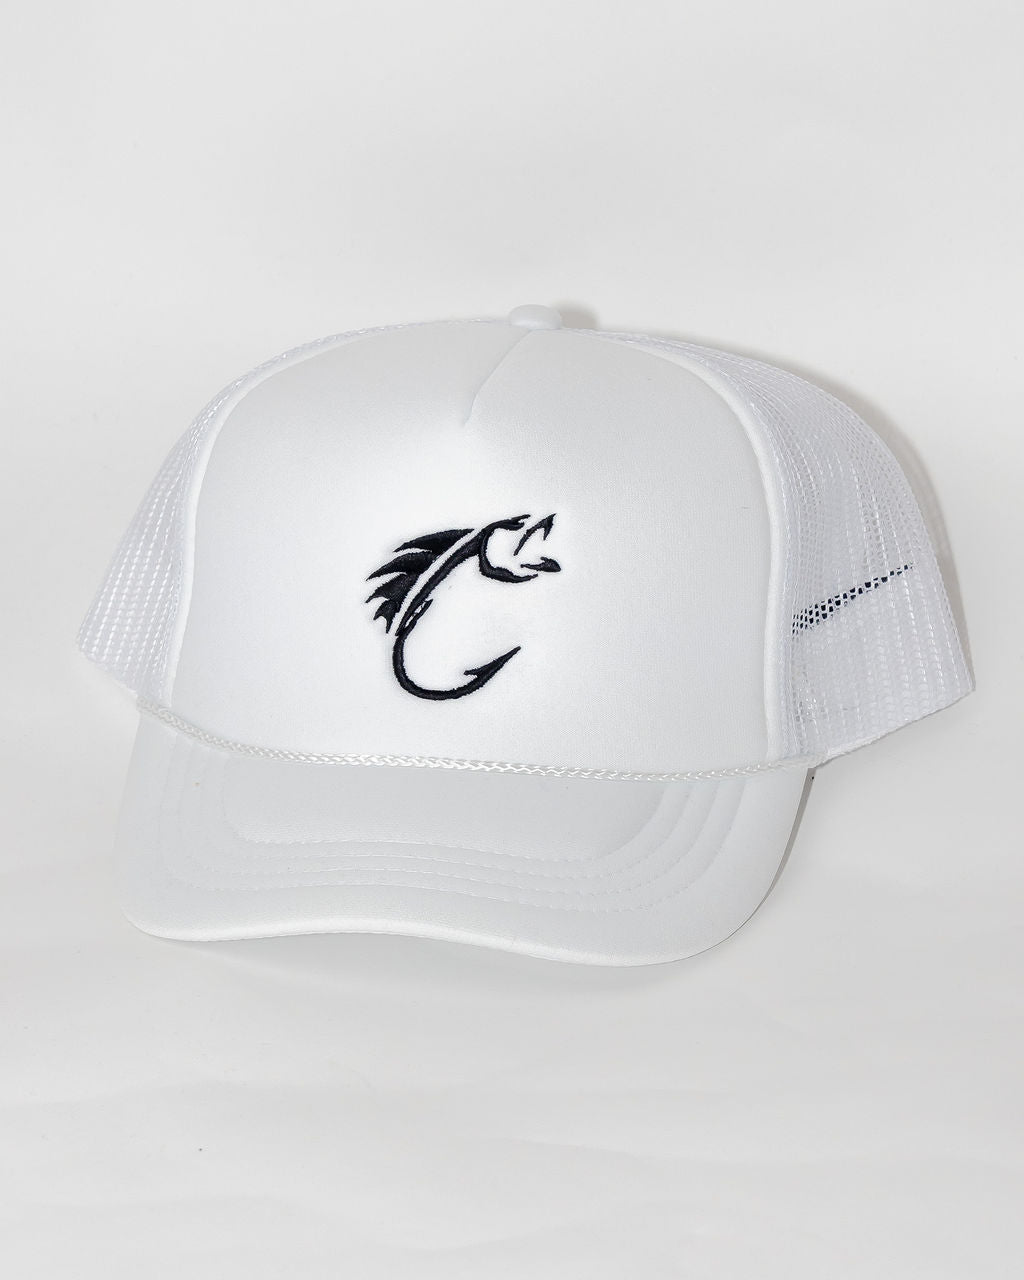 Country Rods Hook Snapback Hats – Country Rods Apparel